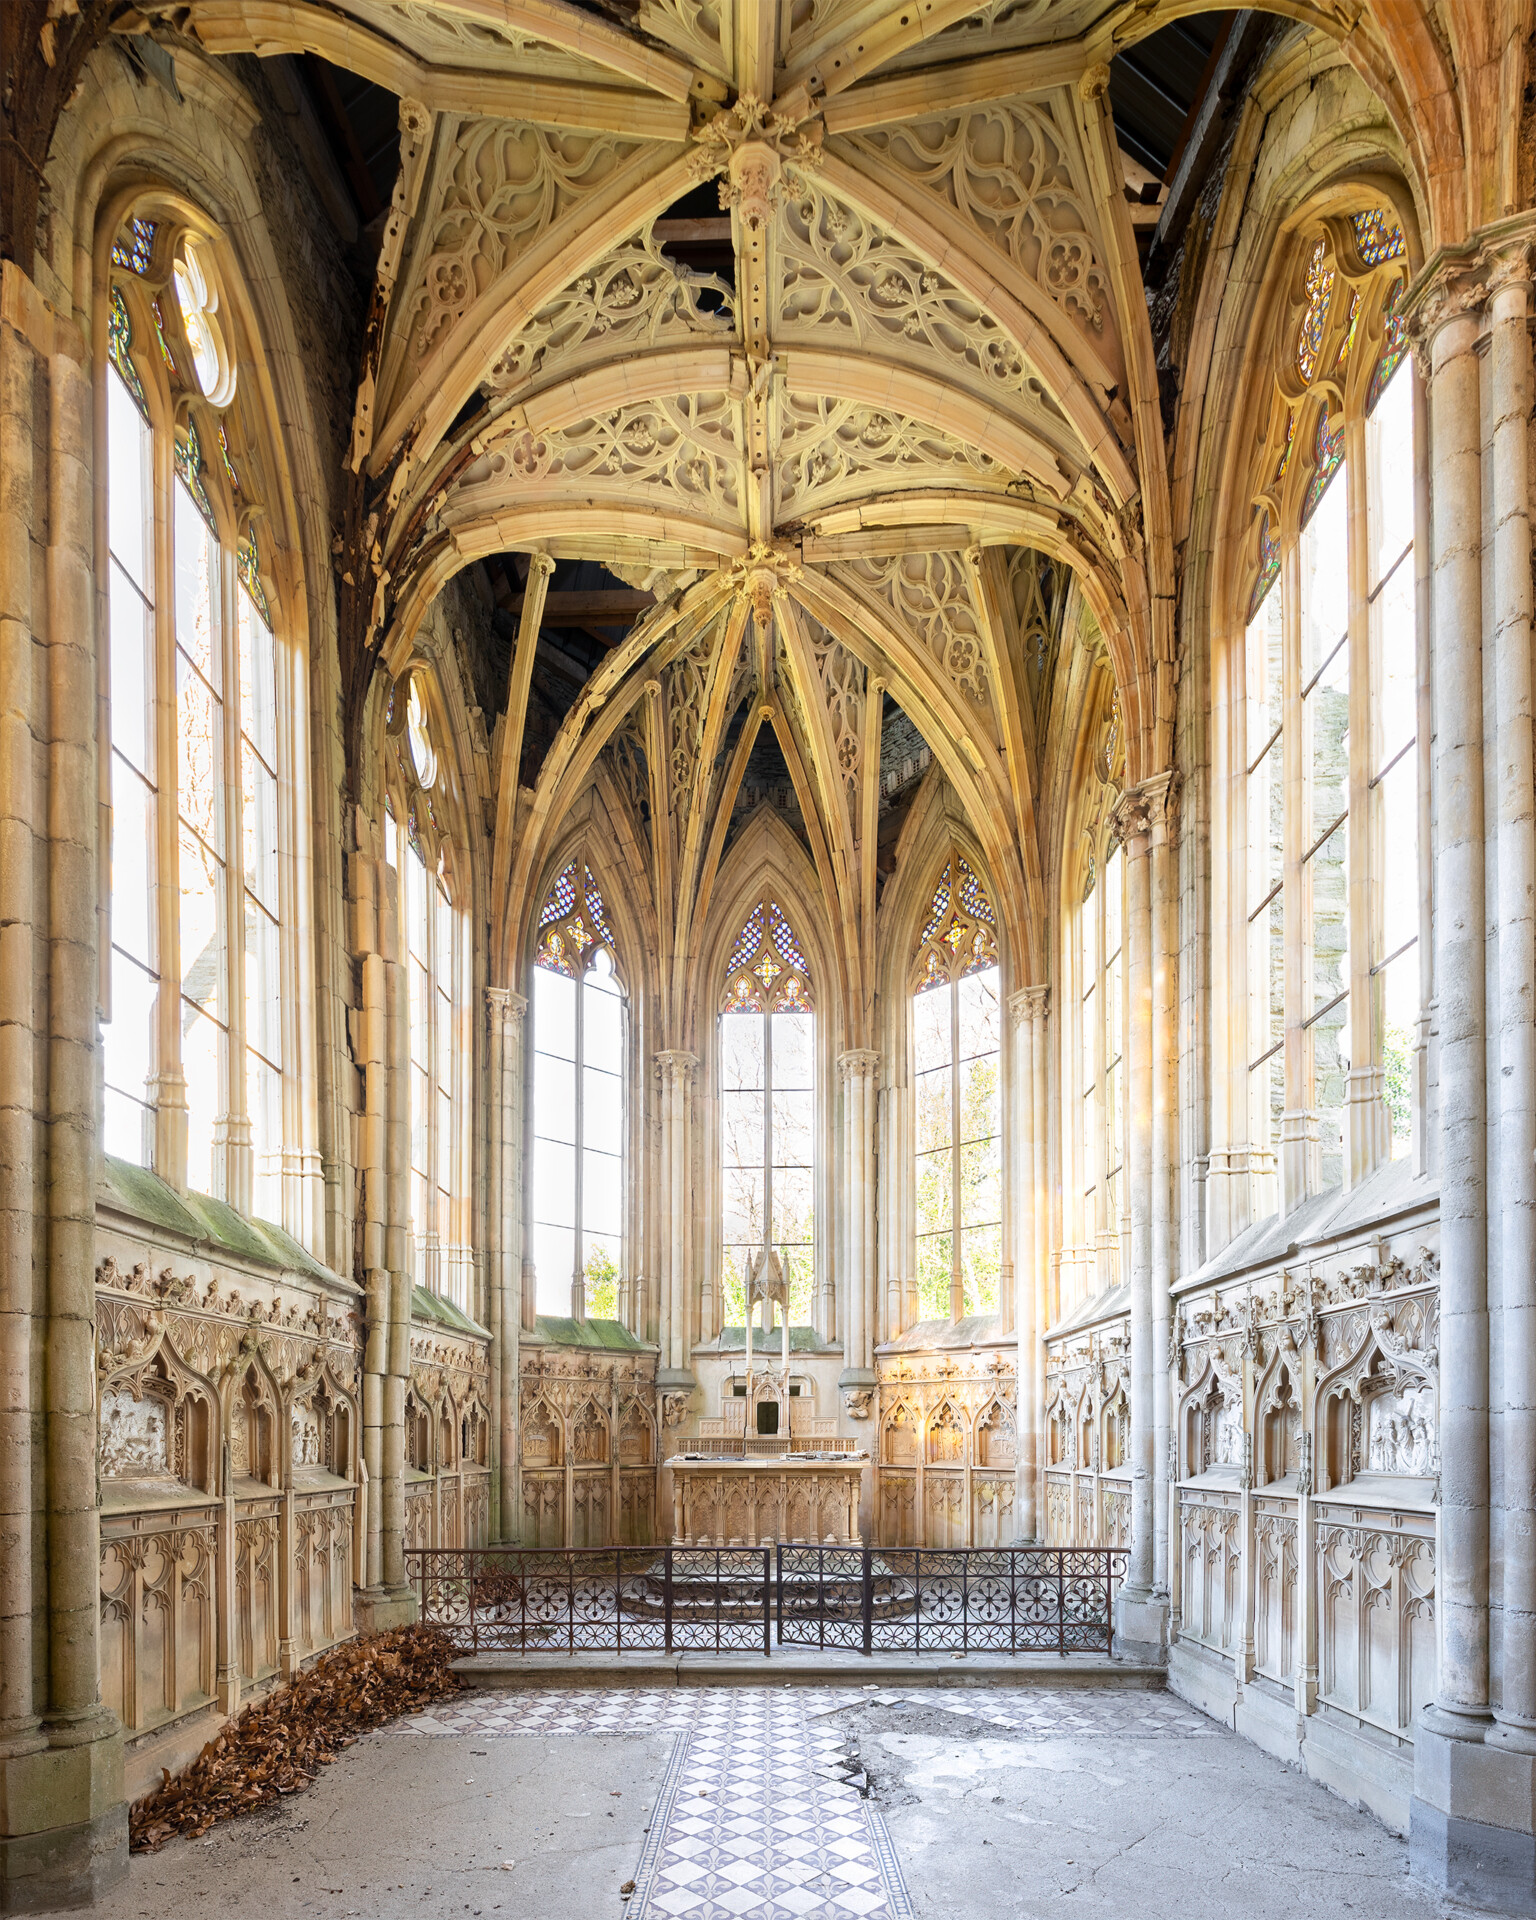 Abandoned church with incredible architecture in France